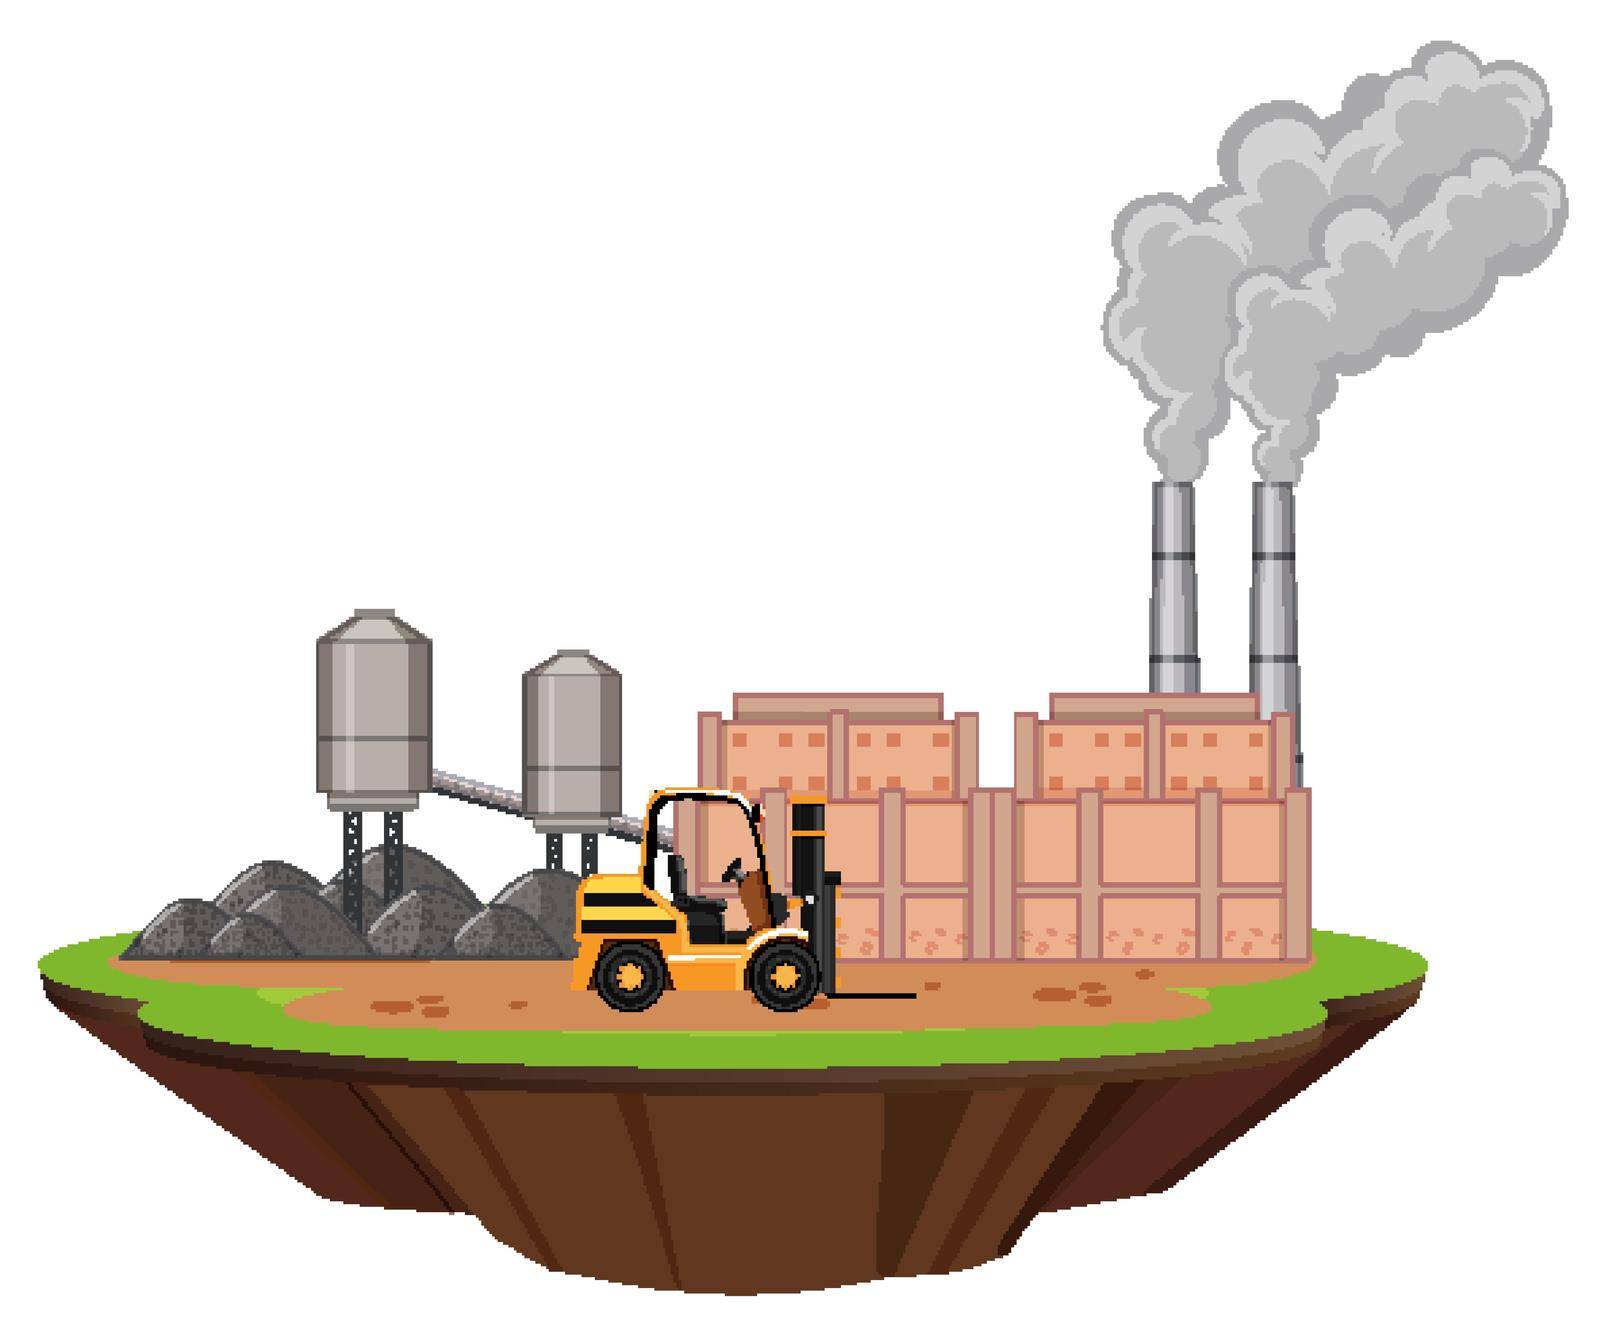 Scene with factory buildings and forklift illustration